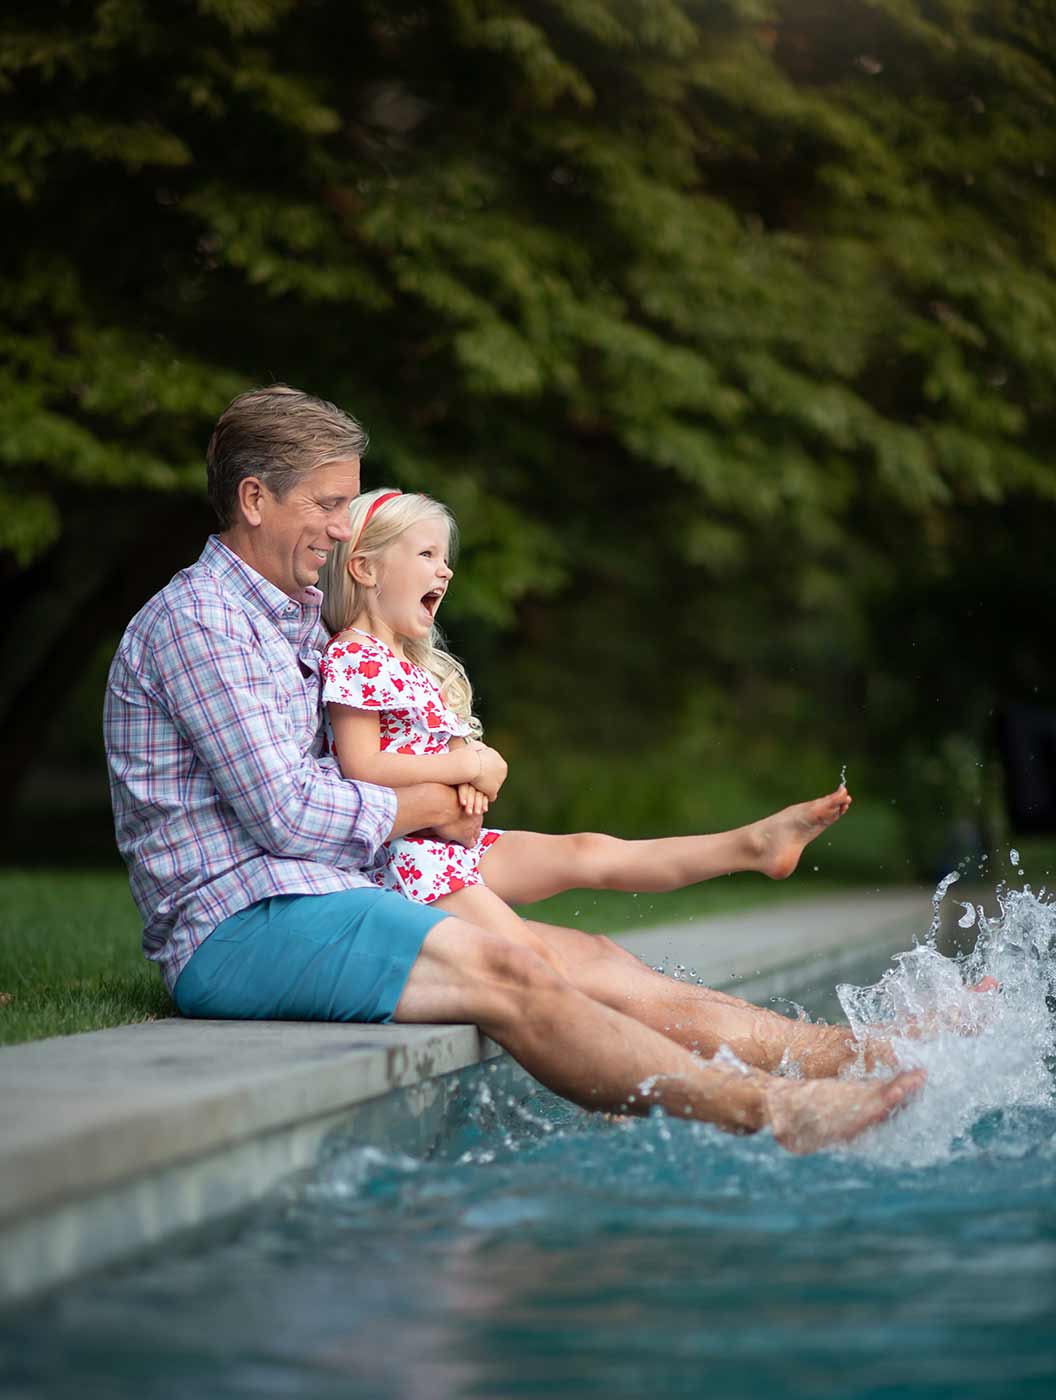 Father and his daughter kicking water in a swimming pool